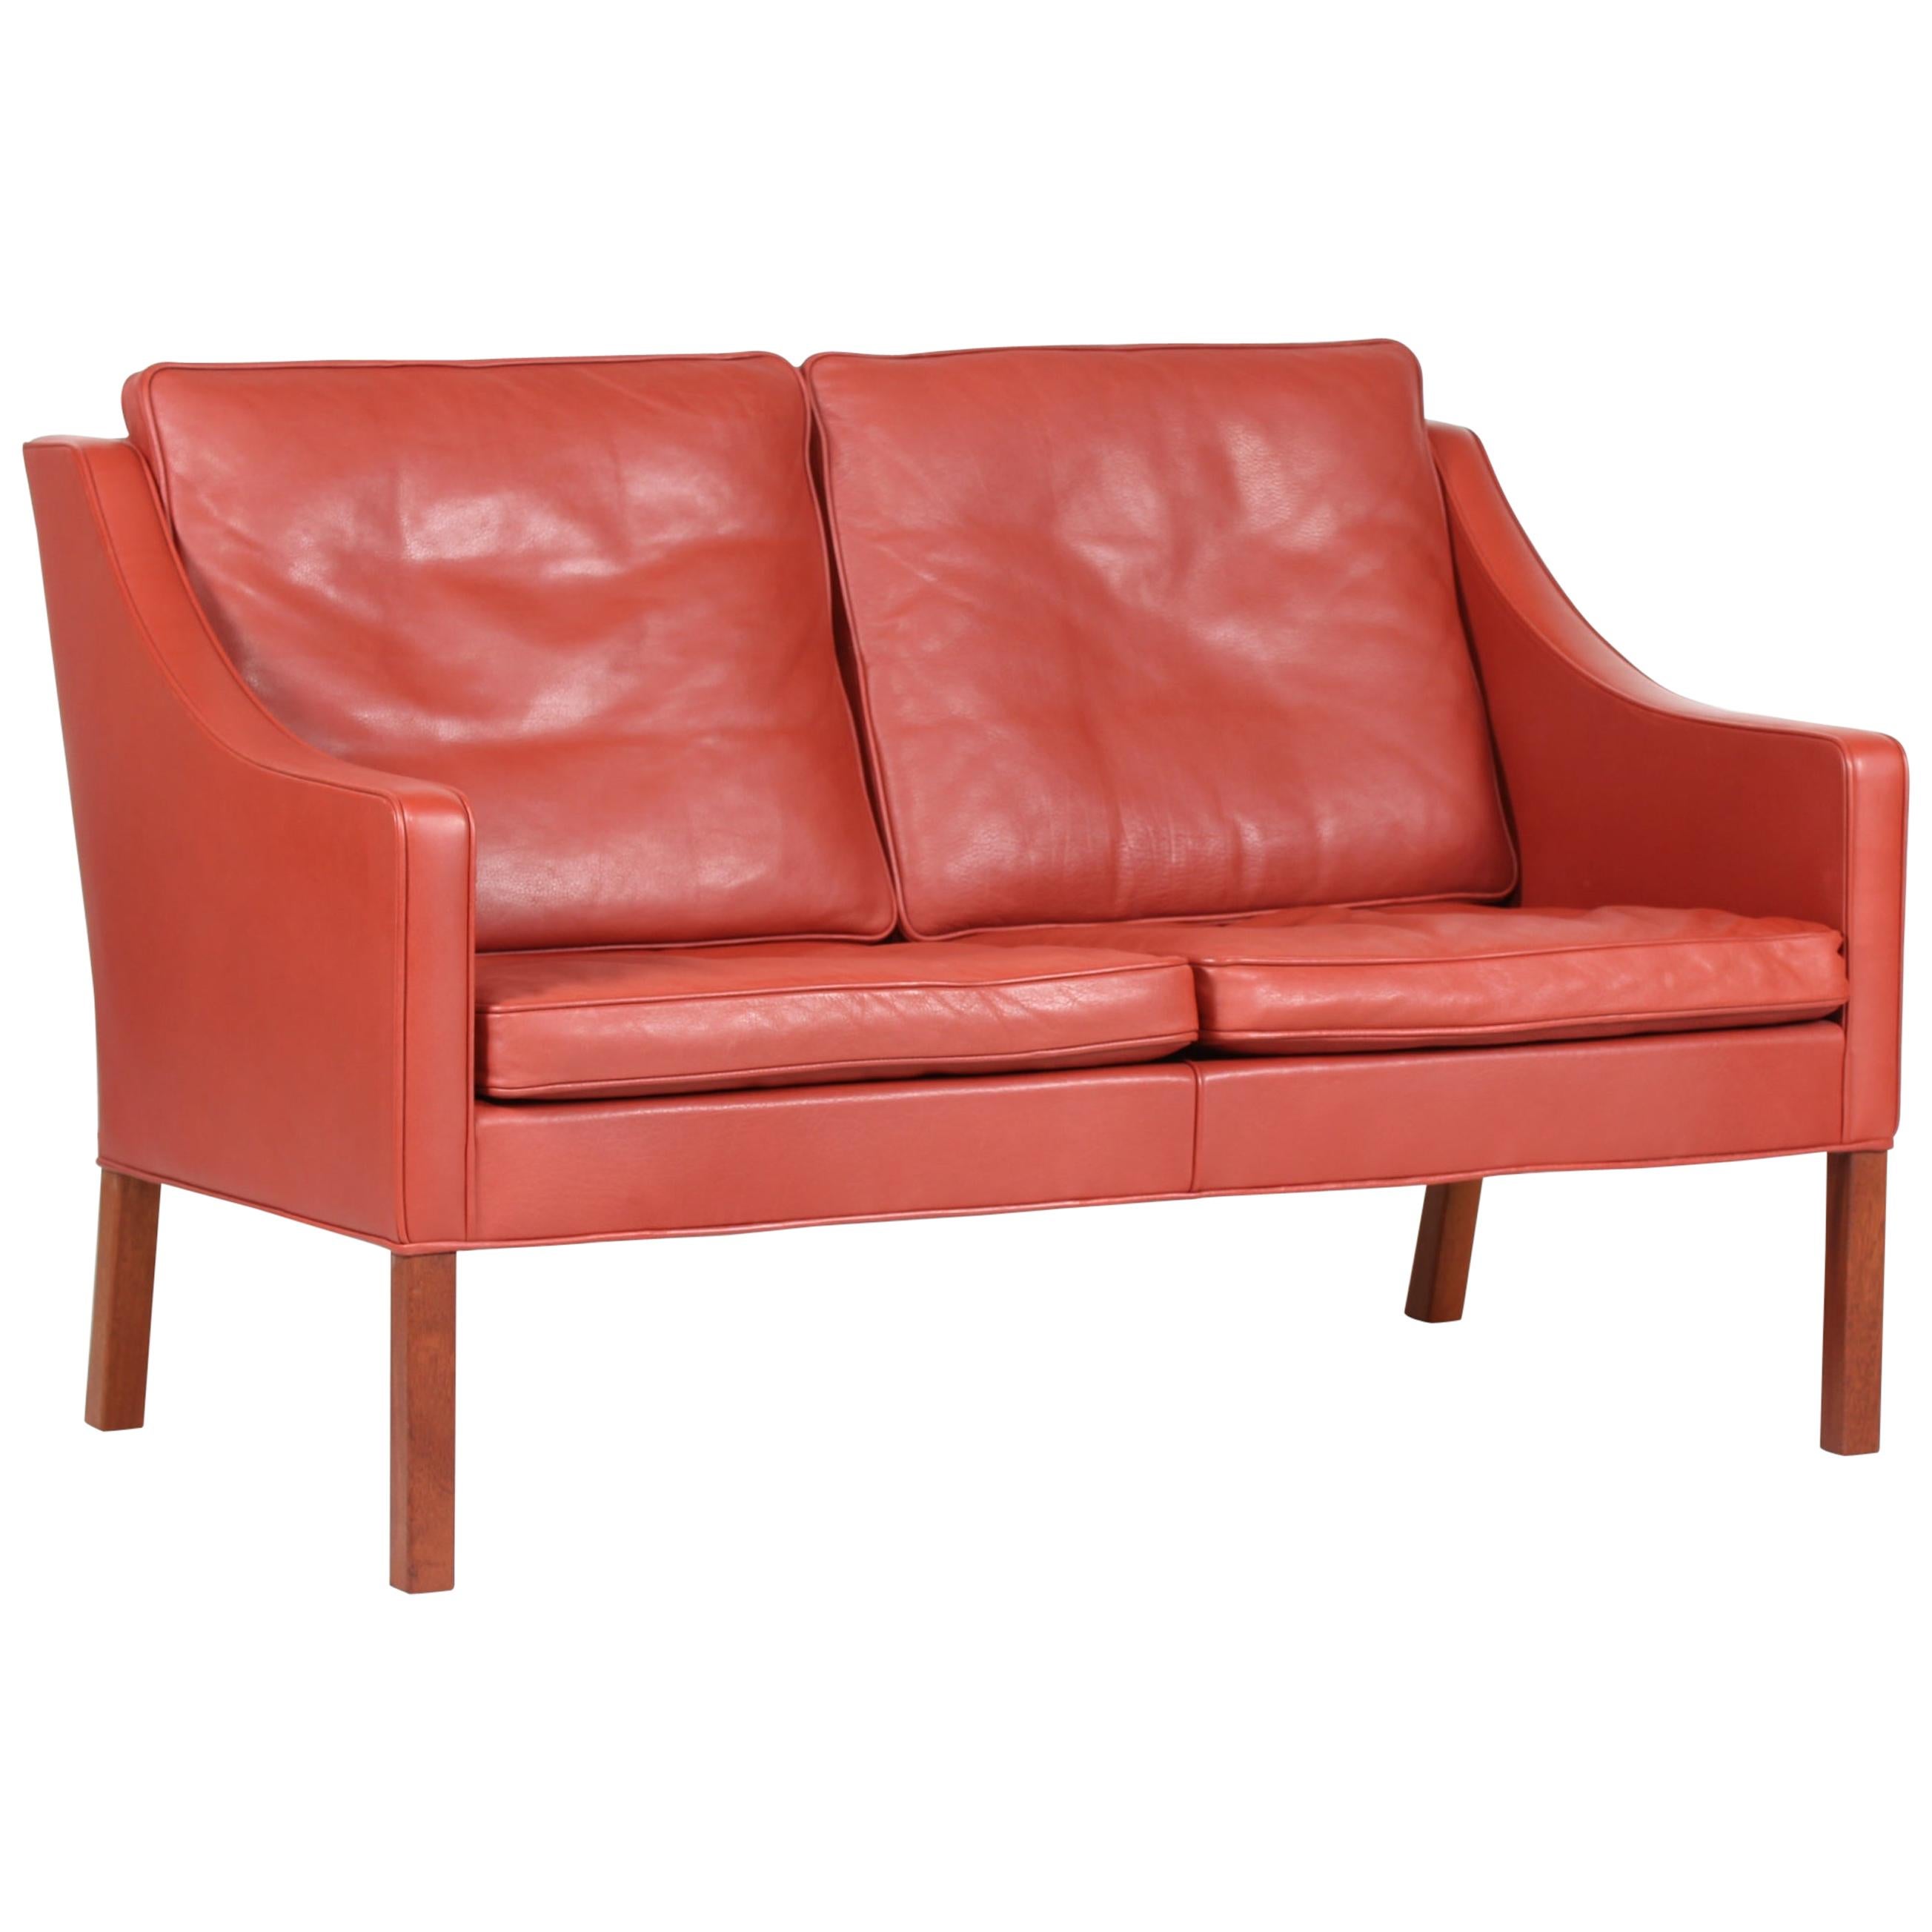 Børge Mogensen Sofa 2208 with Red Brown Leather by Fredericia Stolefabrik